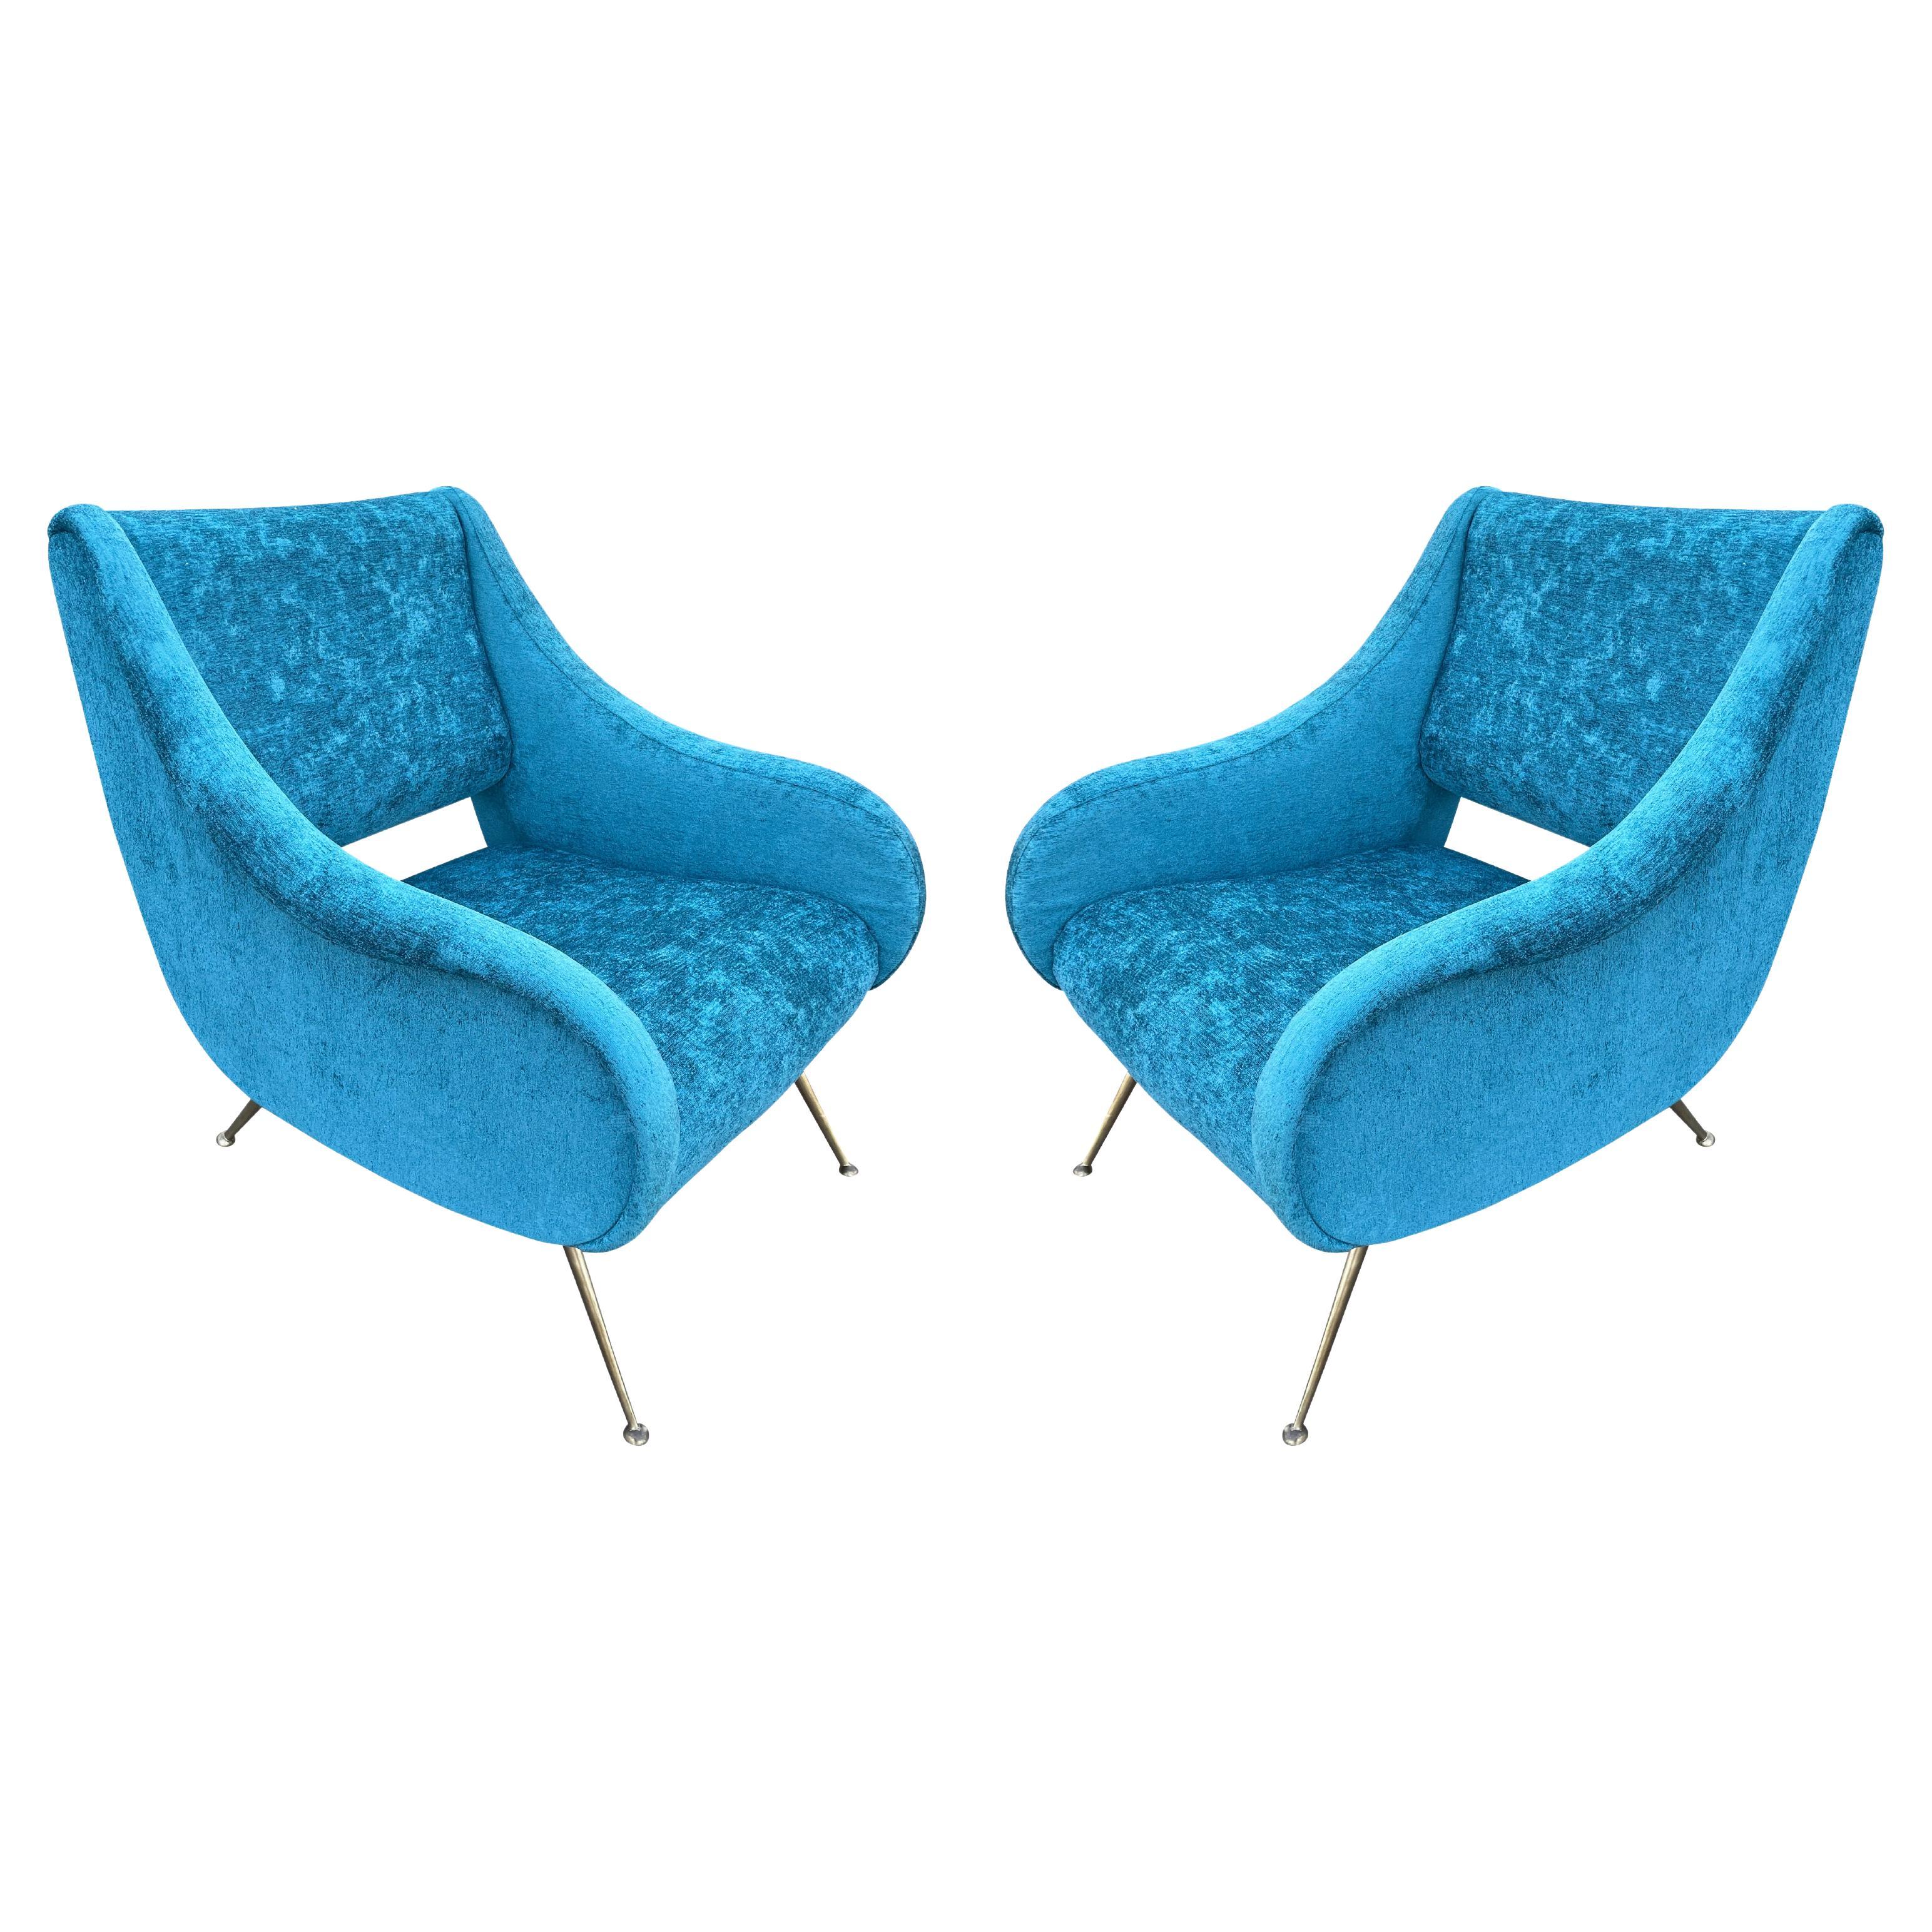 Italian Mid-Century Armchairs in the Style of Gio Ponti For Sale